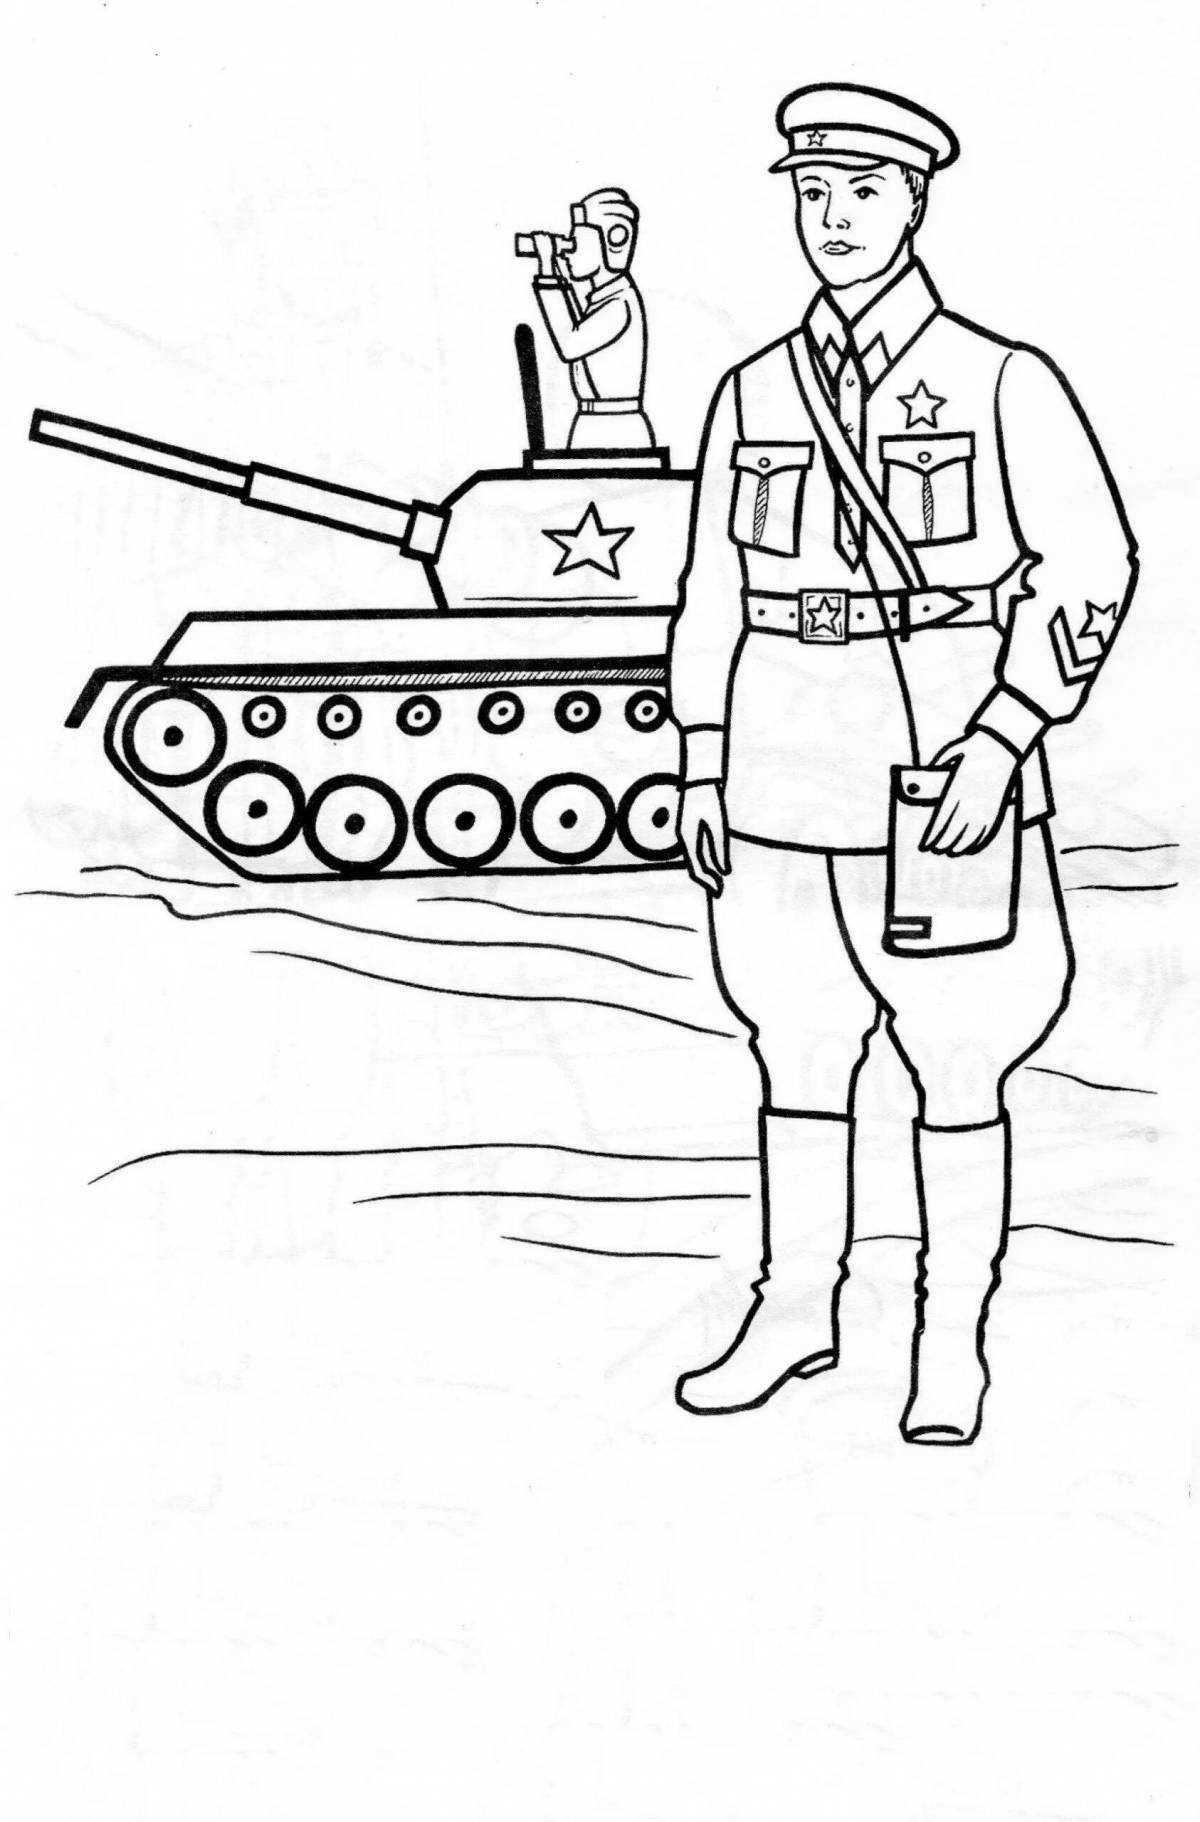 Colourful soldier and tank coloring pages for kids